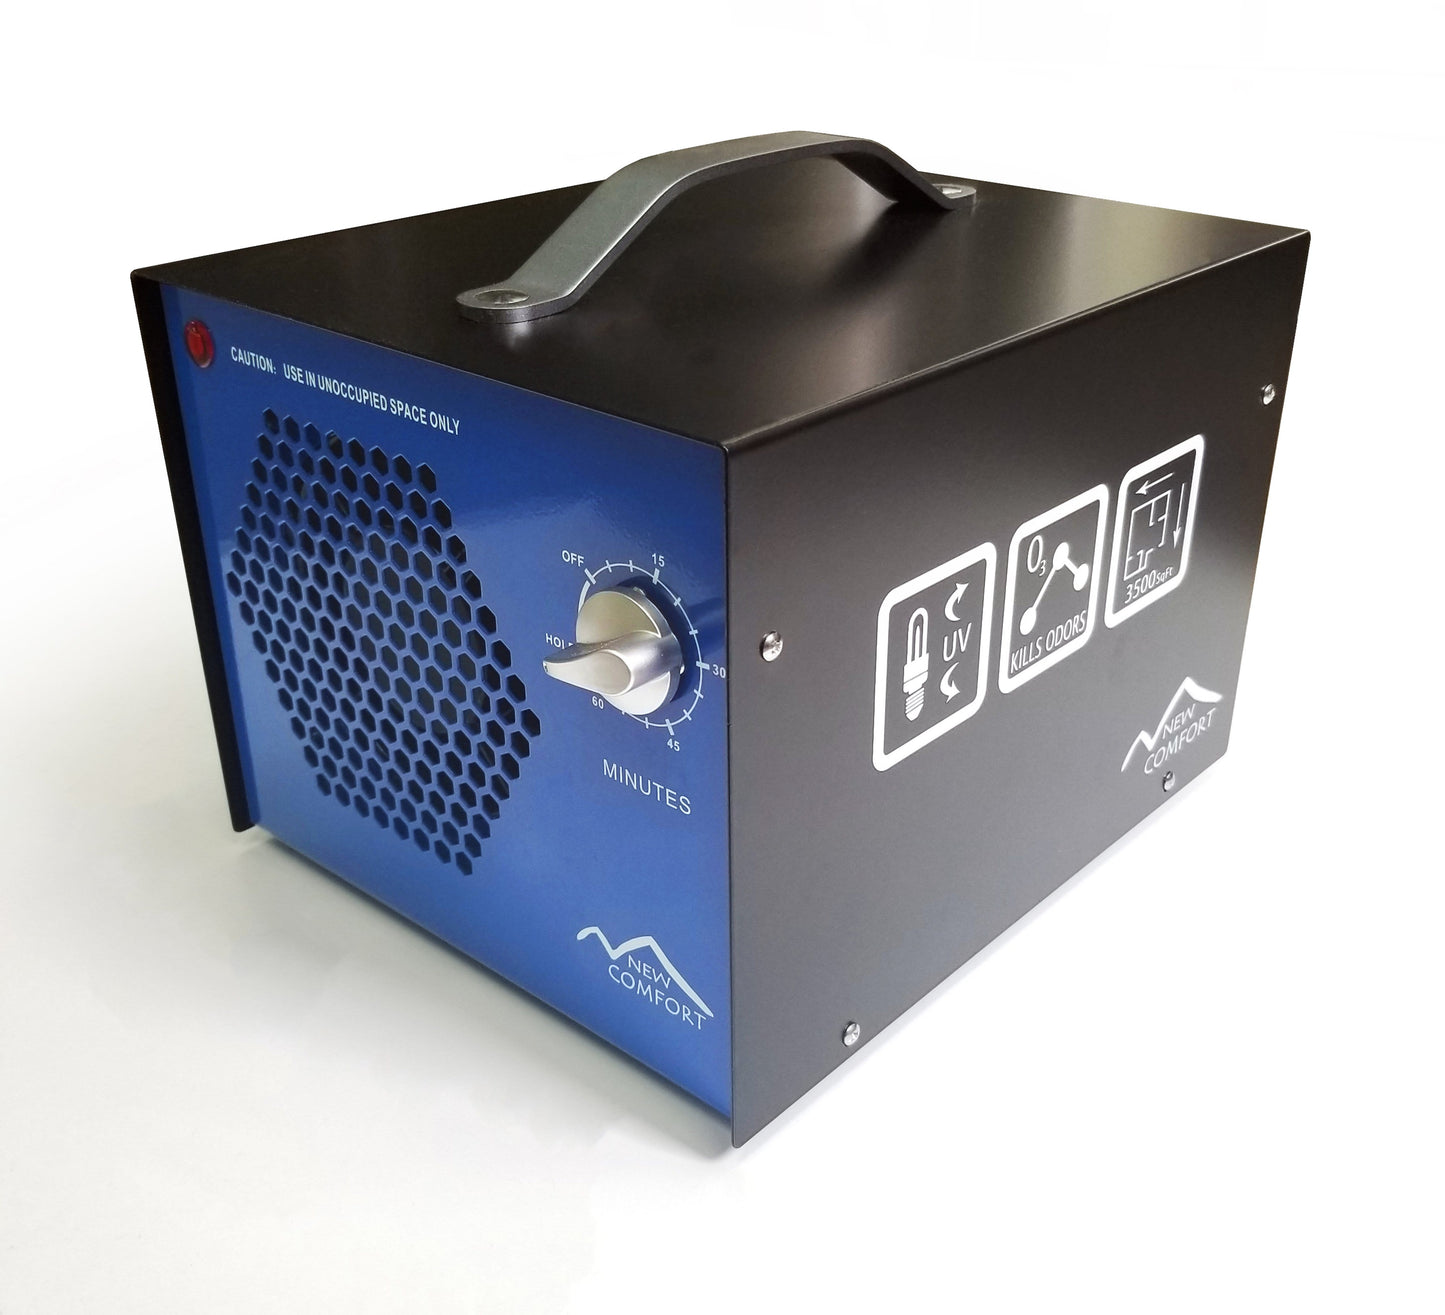 New Comfort Large Odor Eliminating Blue Commercial Ozone Generator by Prolux